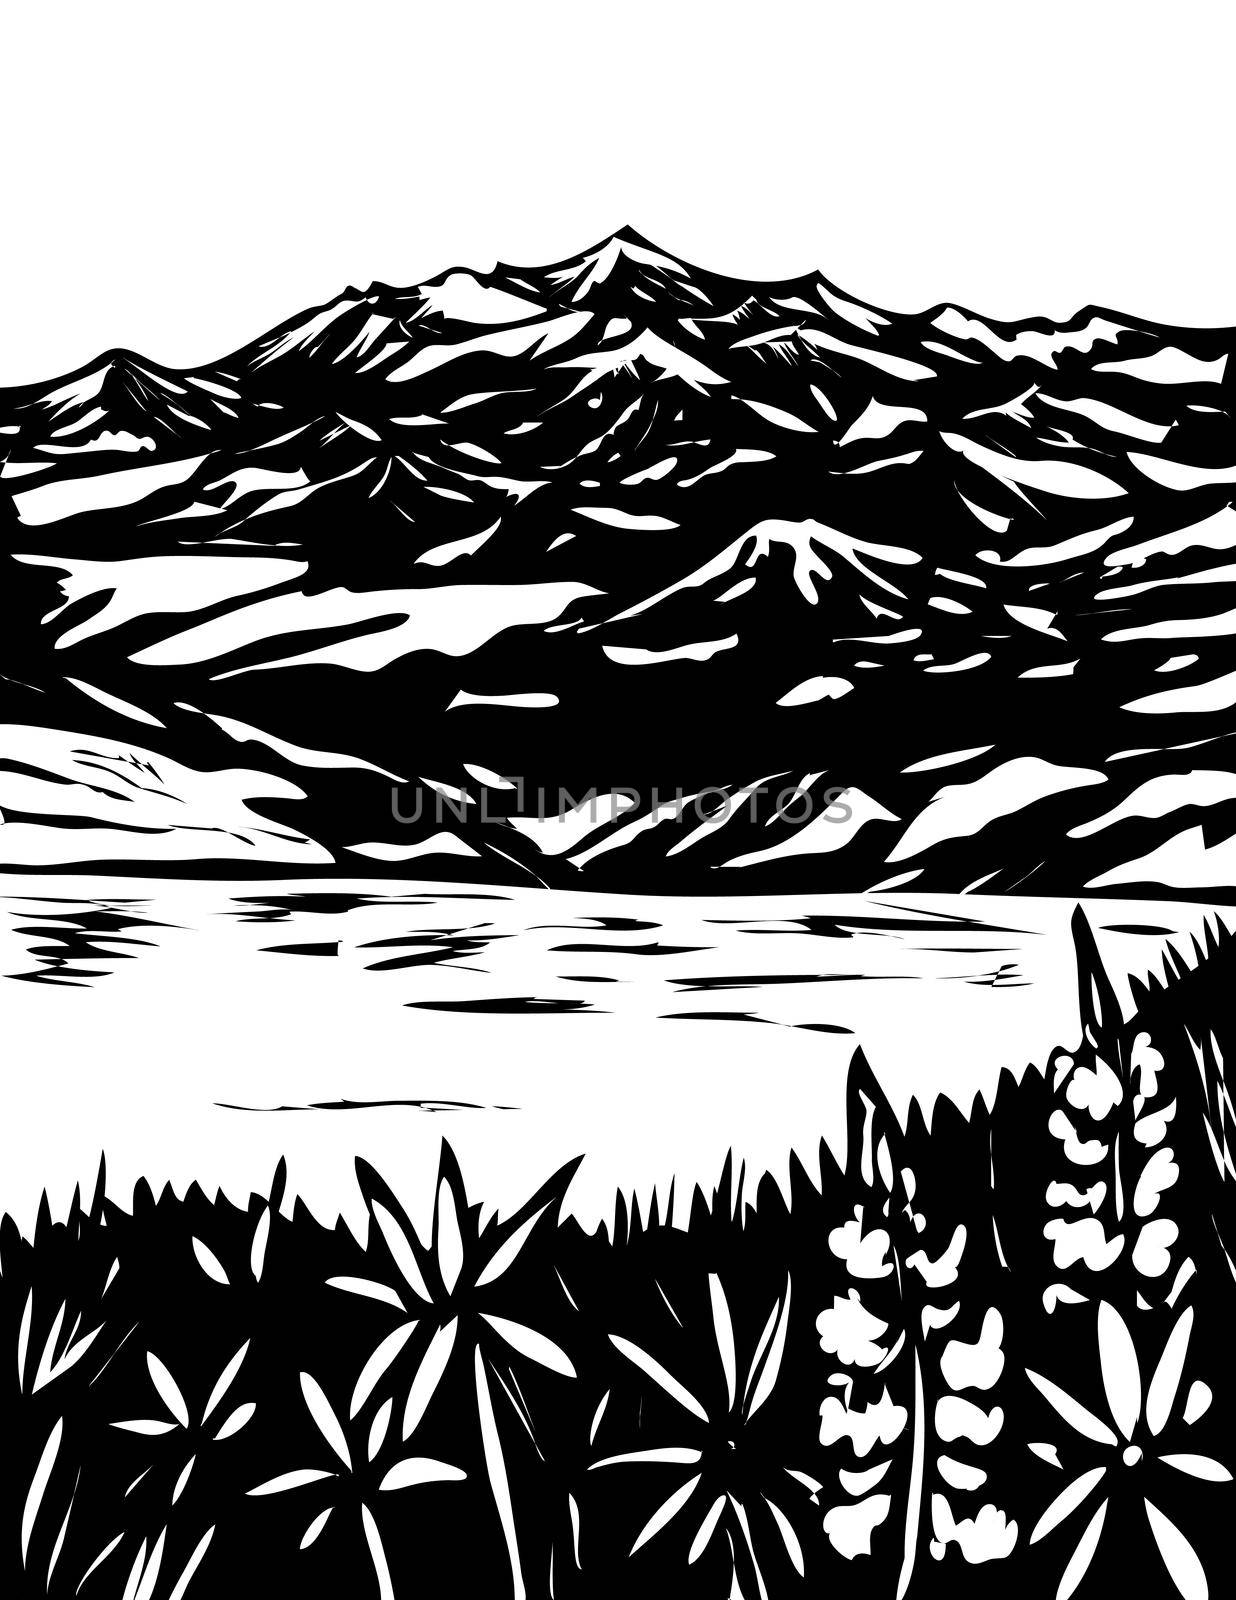 WPA poster monochrome art of the Wrangell and St Elias National Park in south central Alaska USA done in works project administration black and white style.